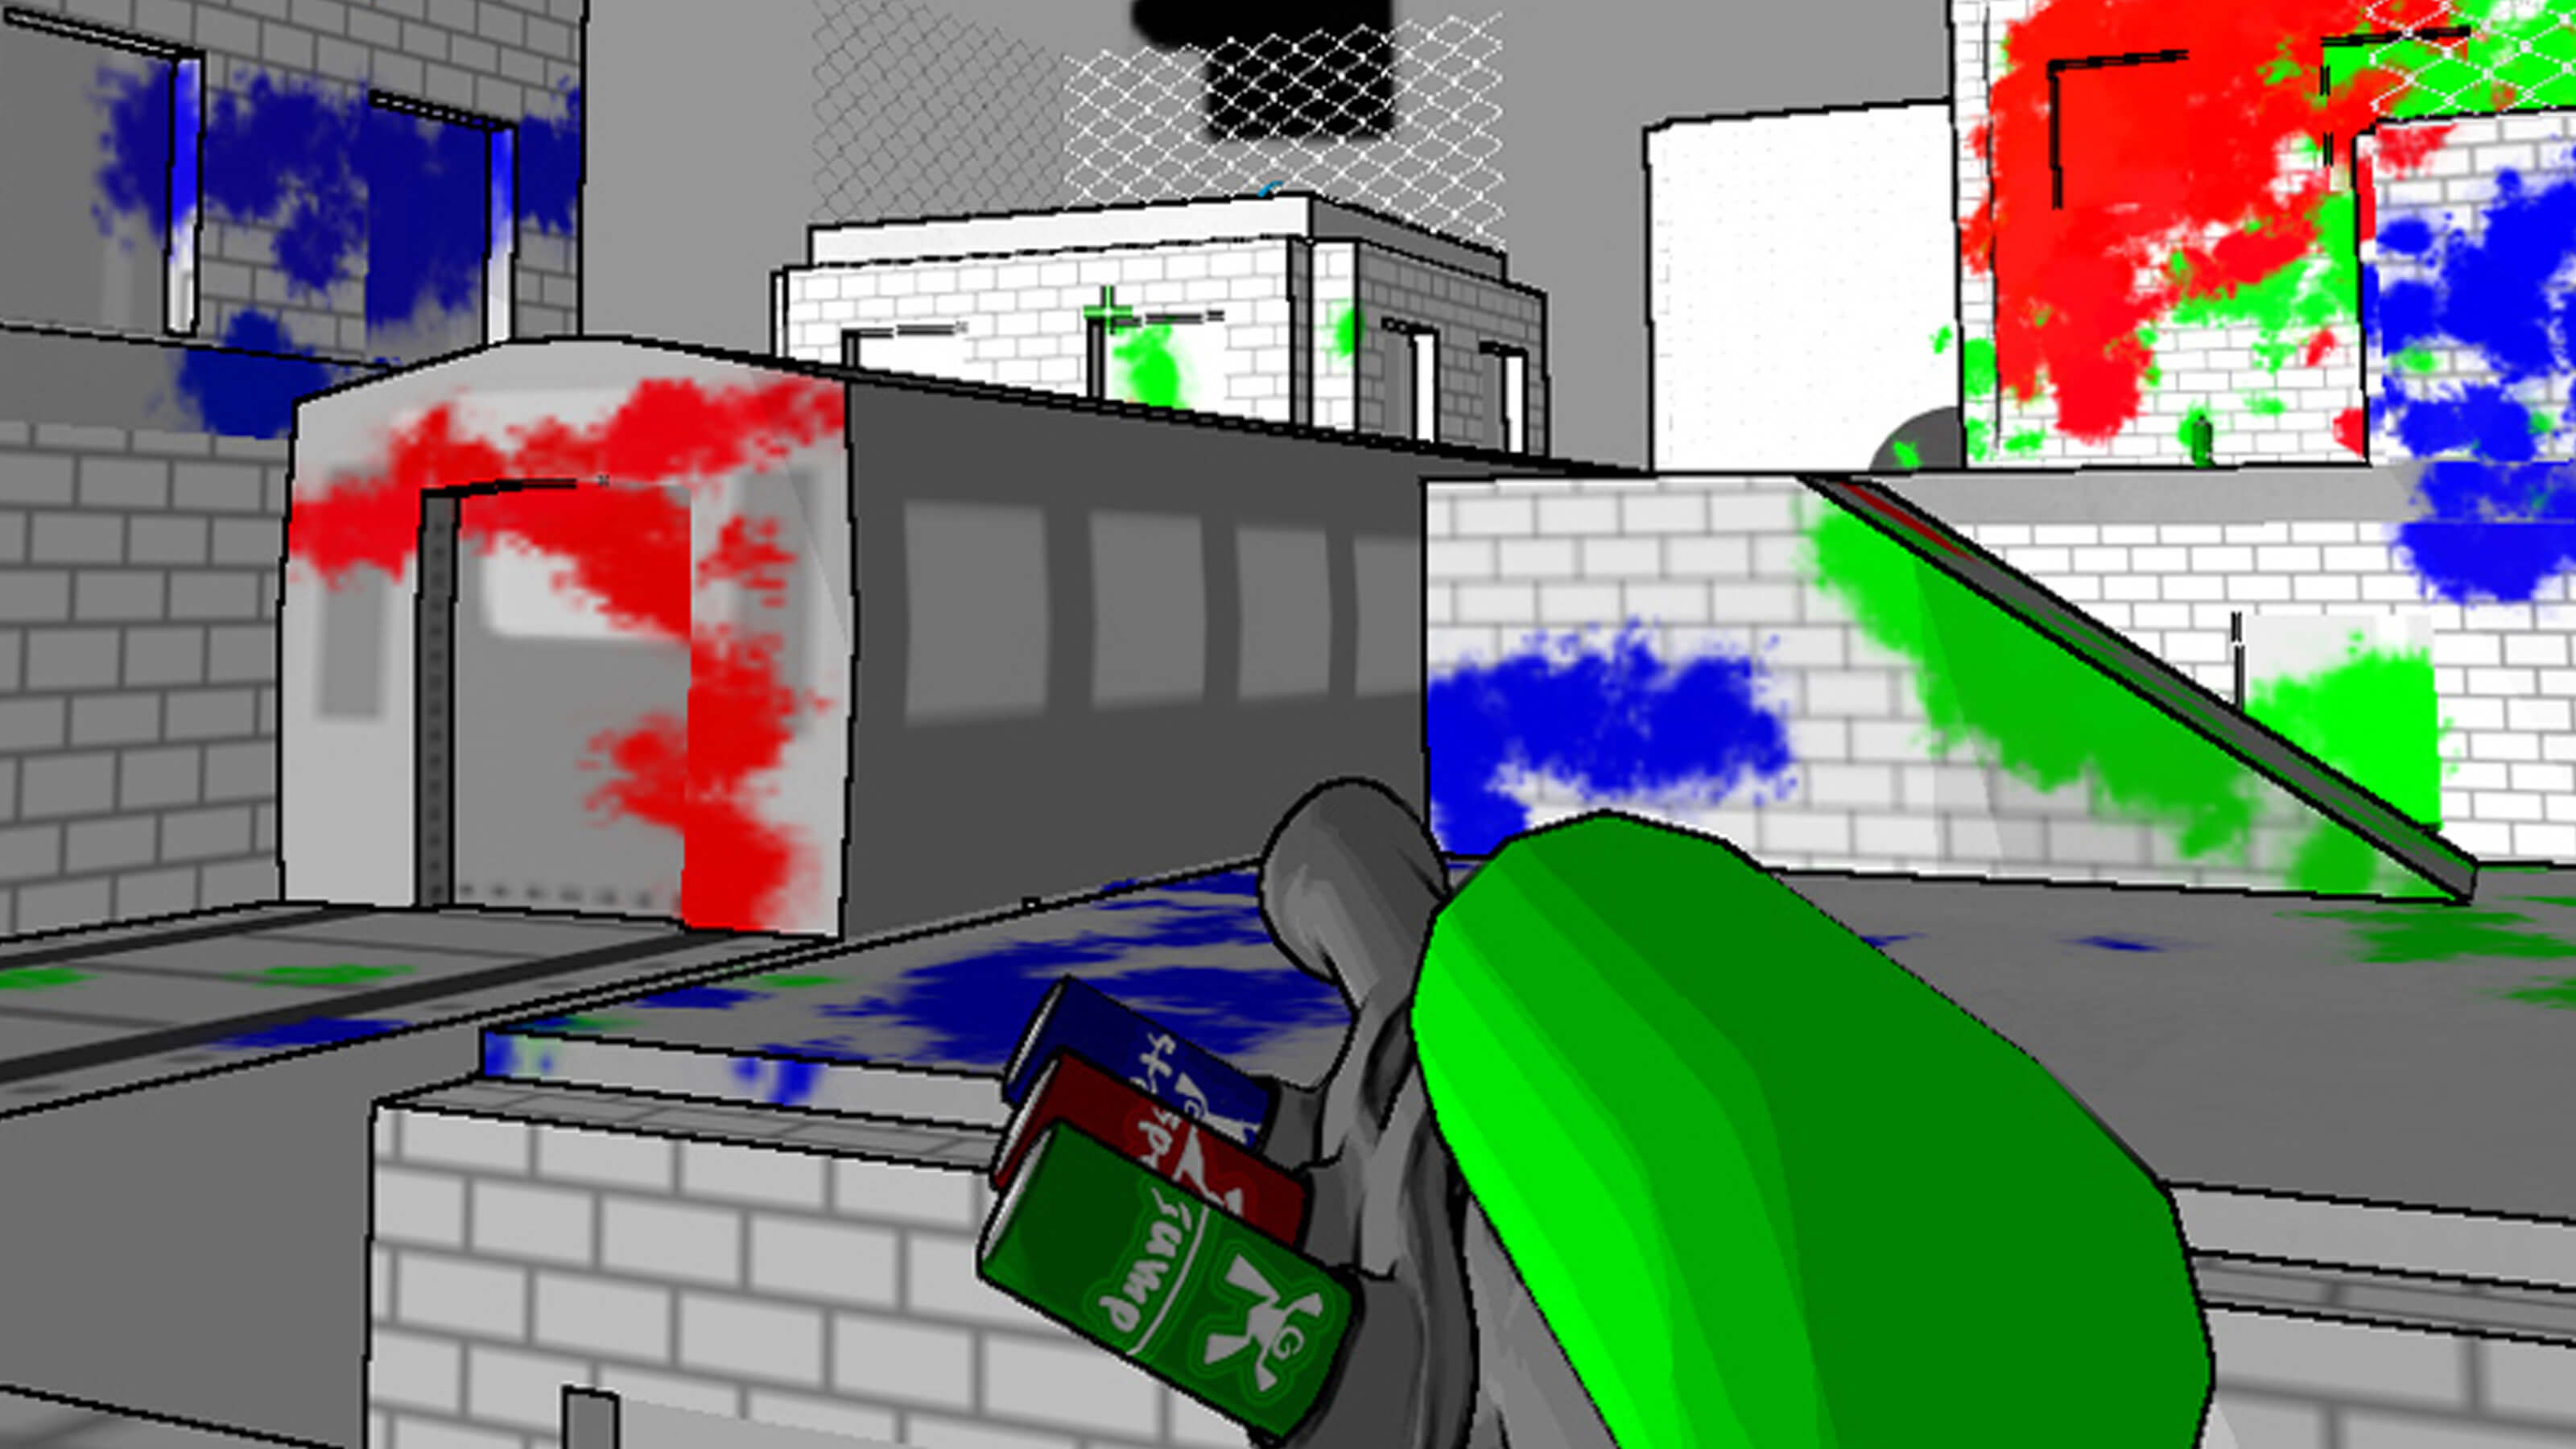 A spray paint gun points at a grey brick building rooftop covered in blue, red and green paint. 